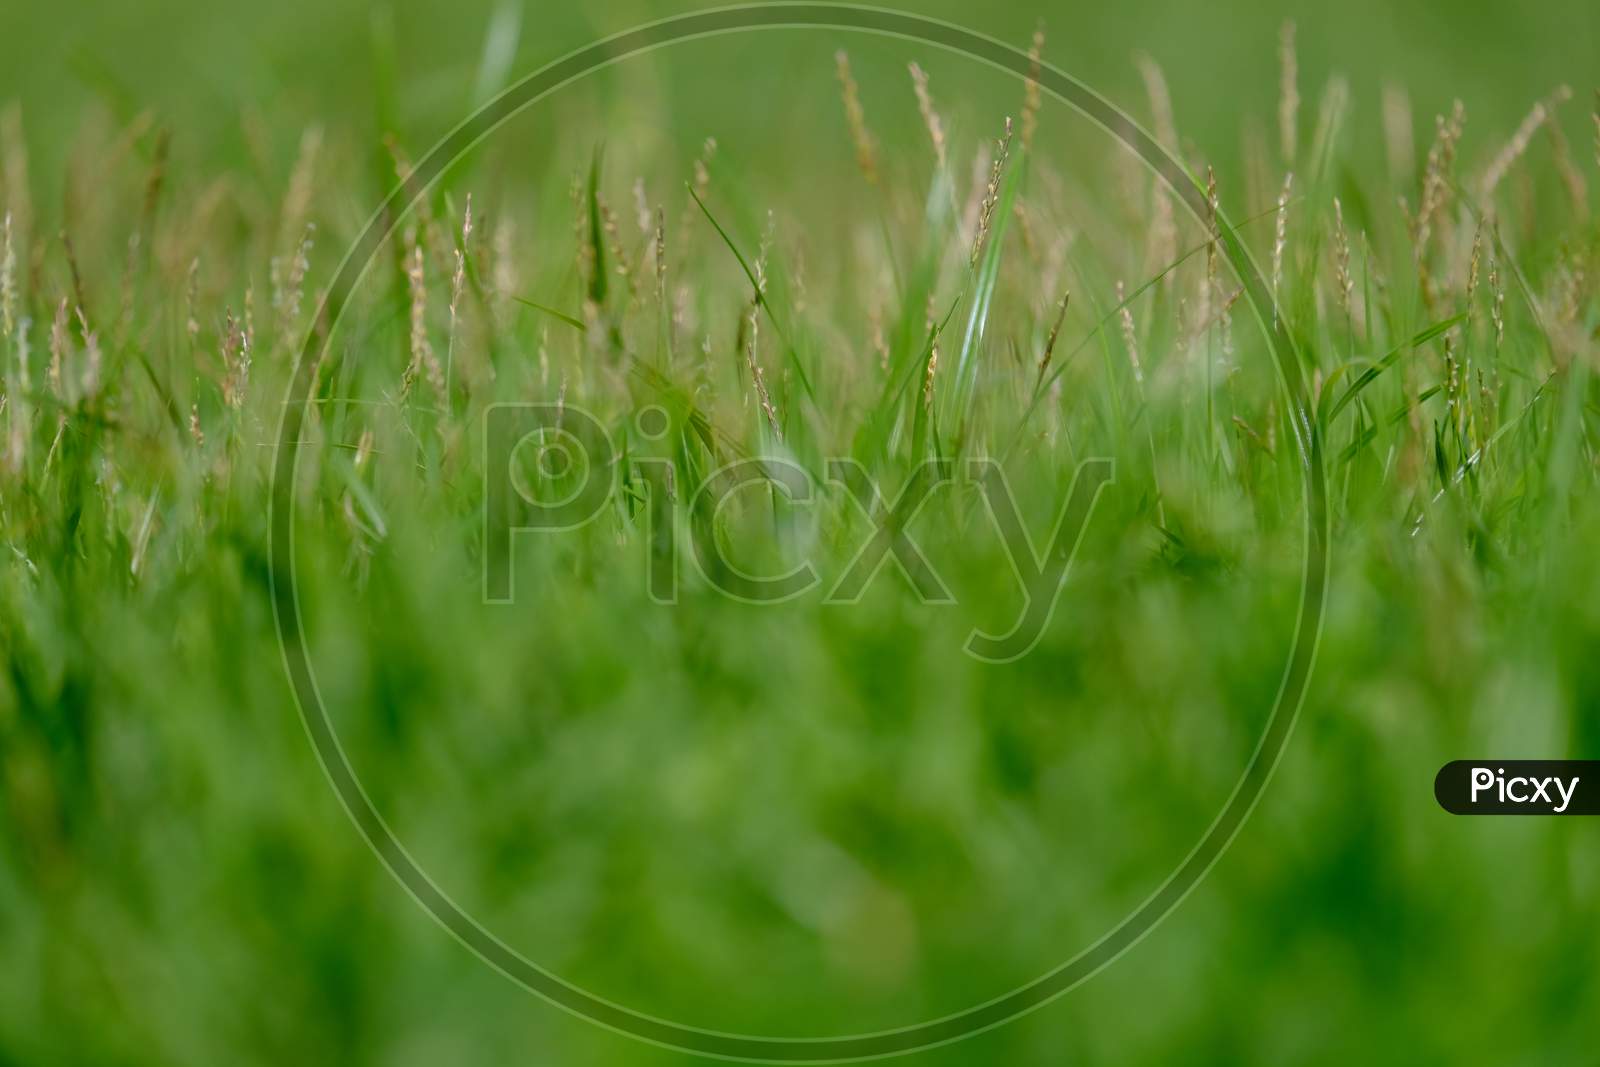 Abstract Image Of Green Grass For Background Or Wallpaper